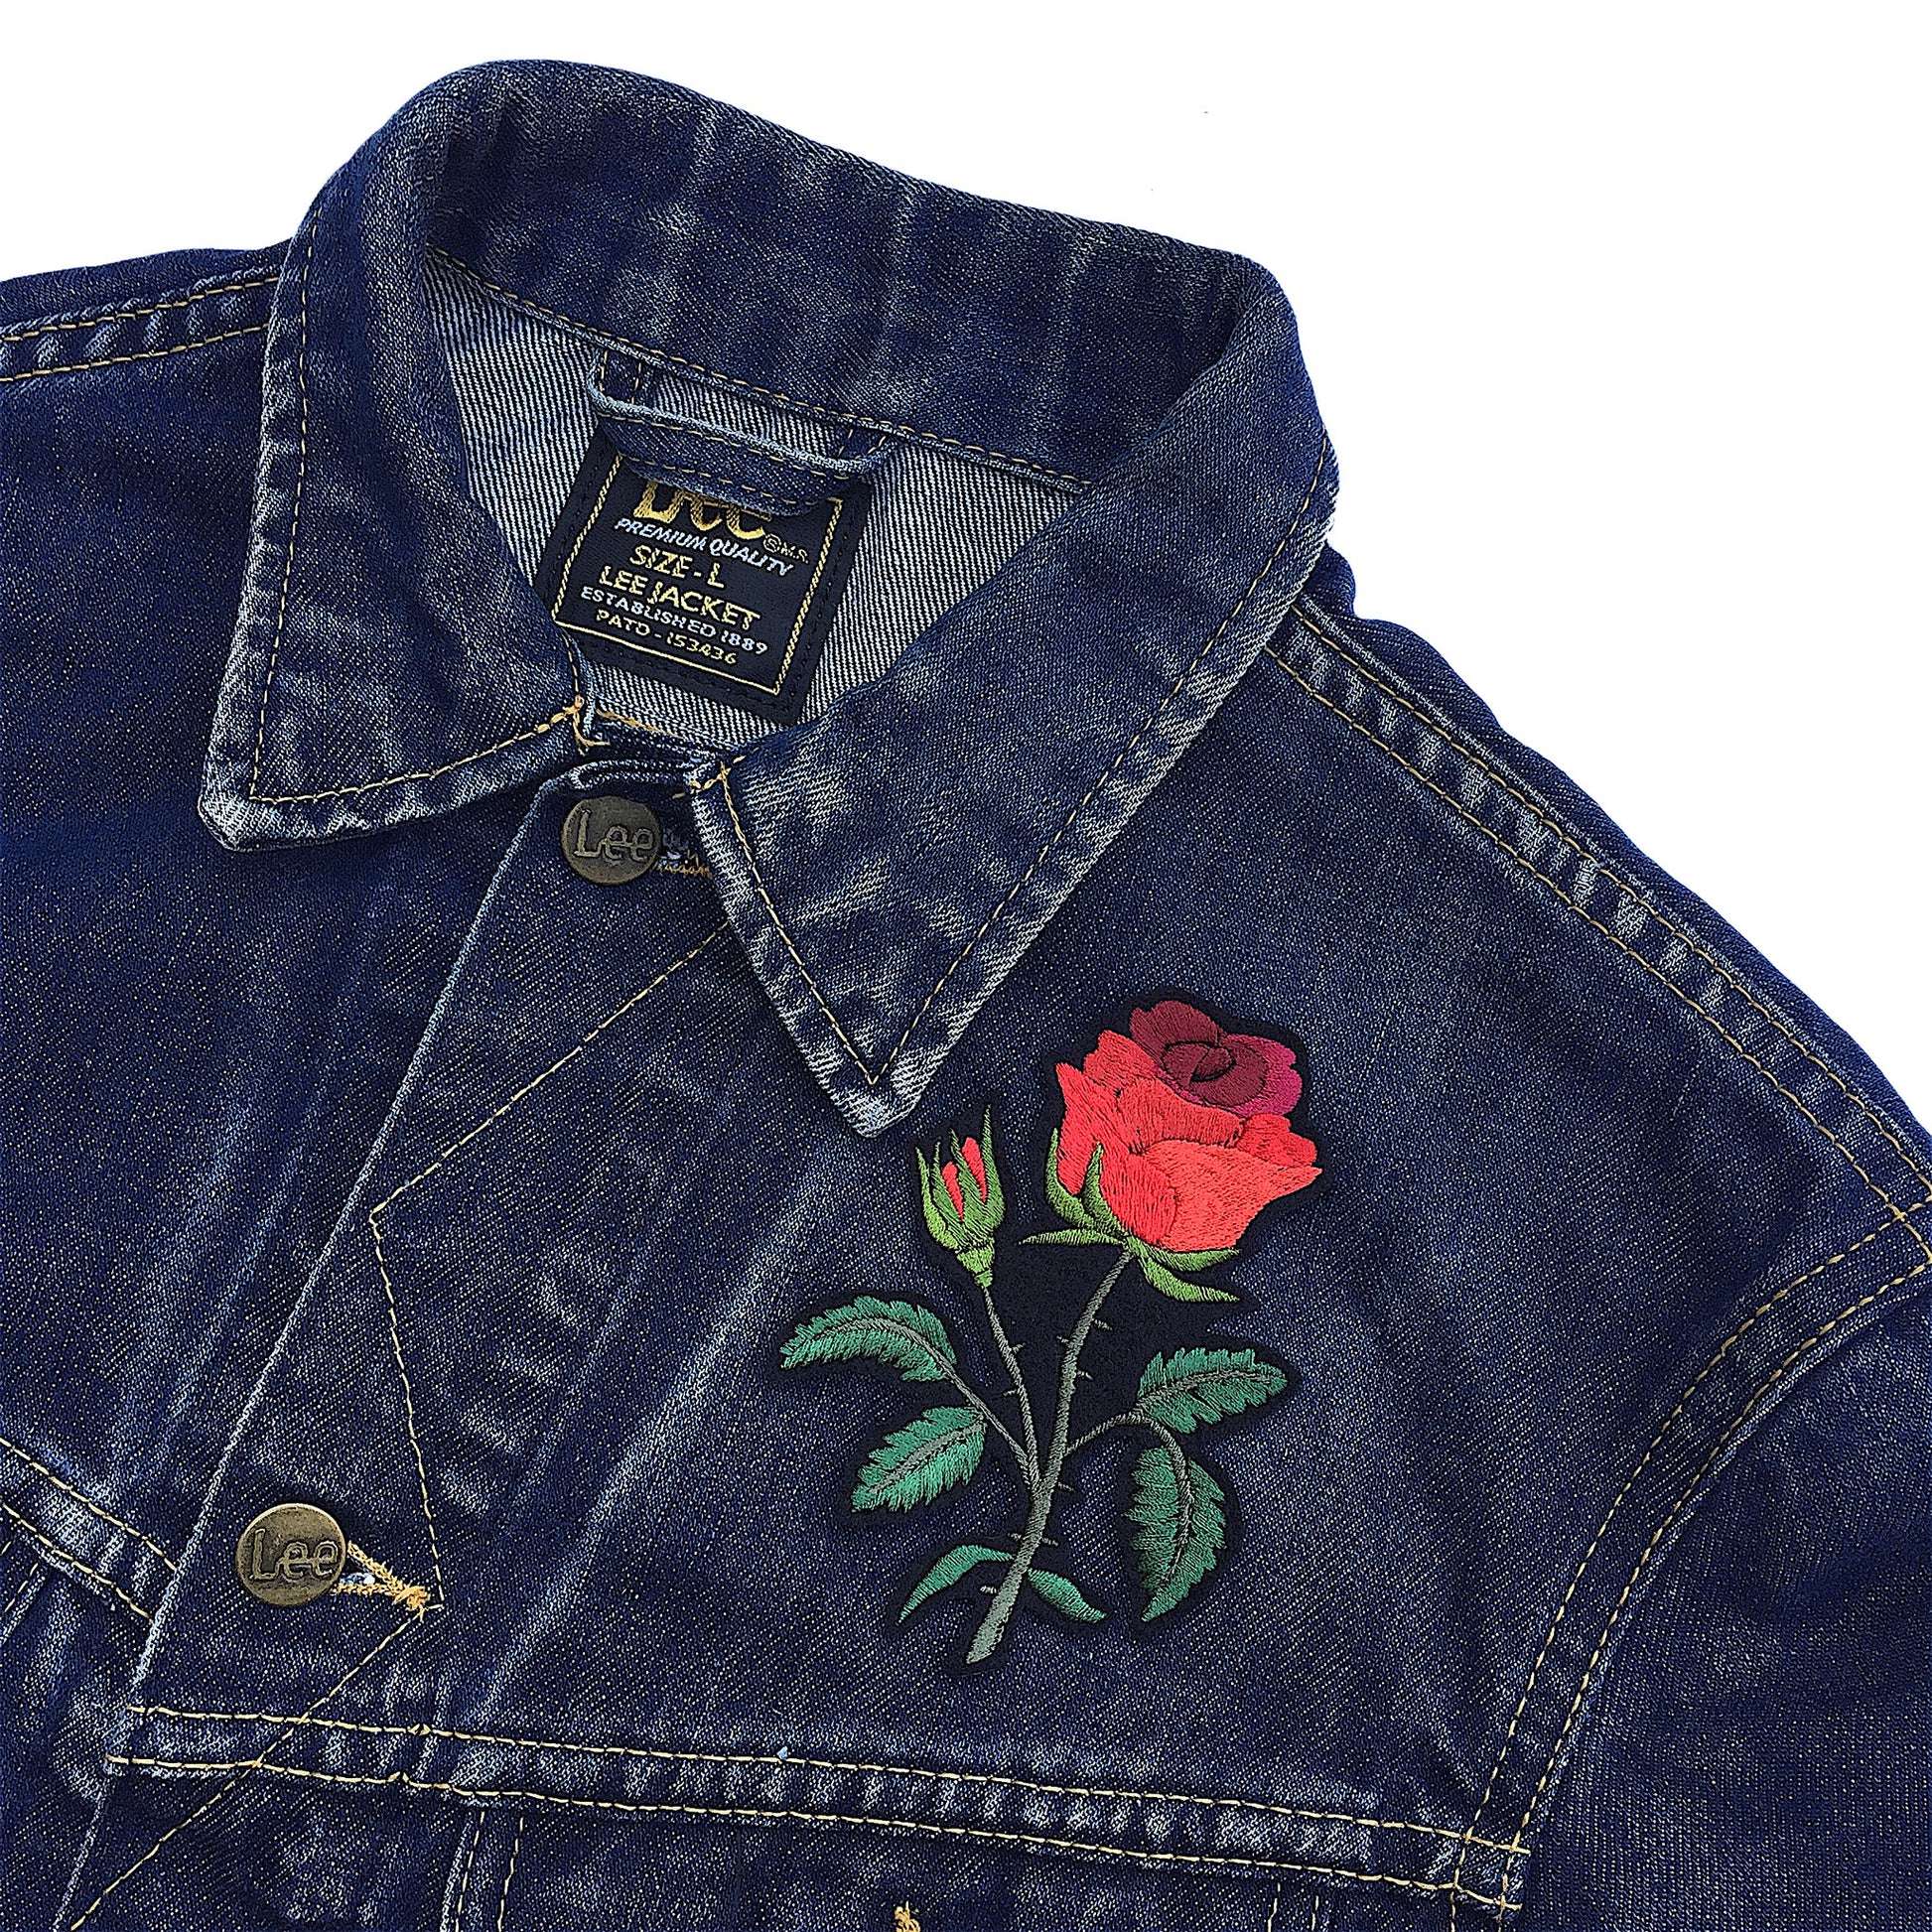 Red rose embroidered patch on the front breast of a denim jacket